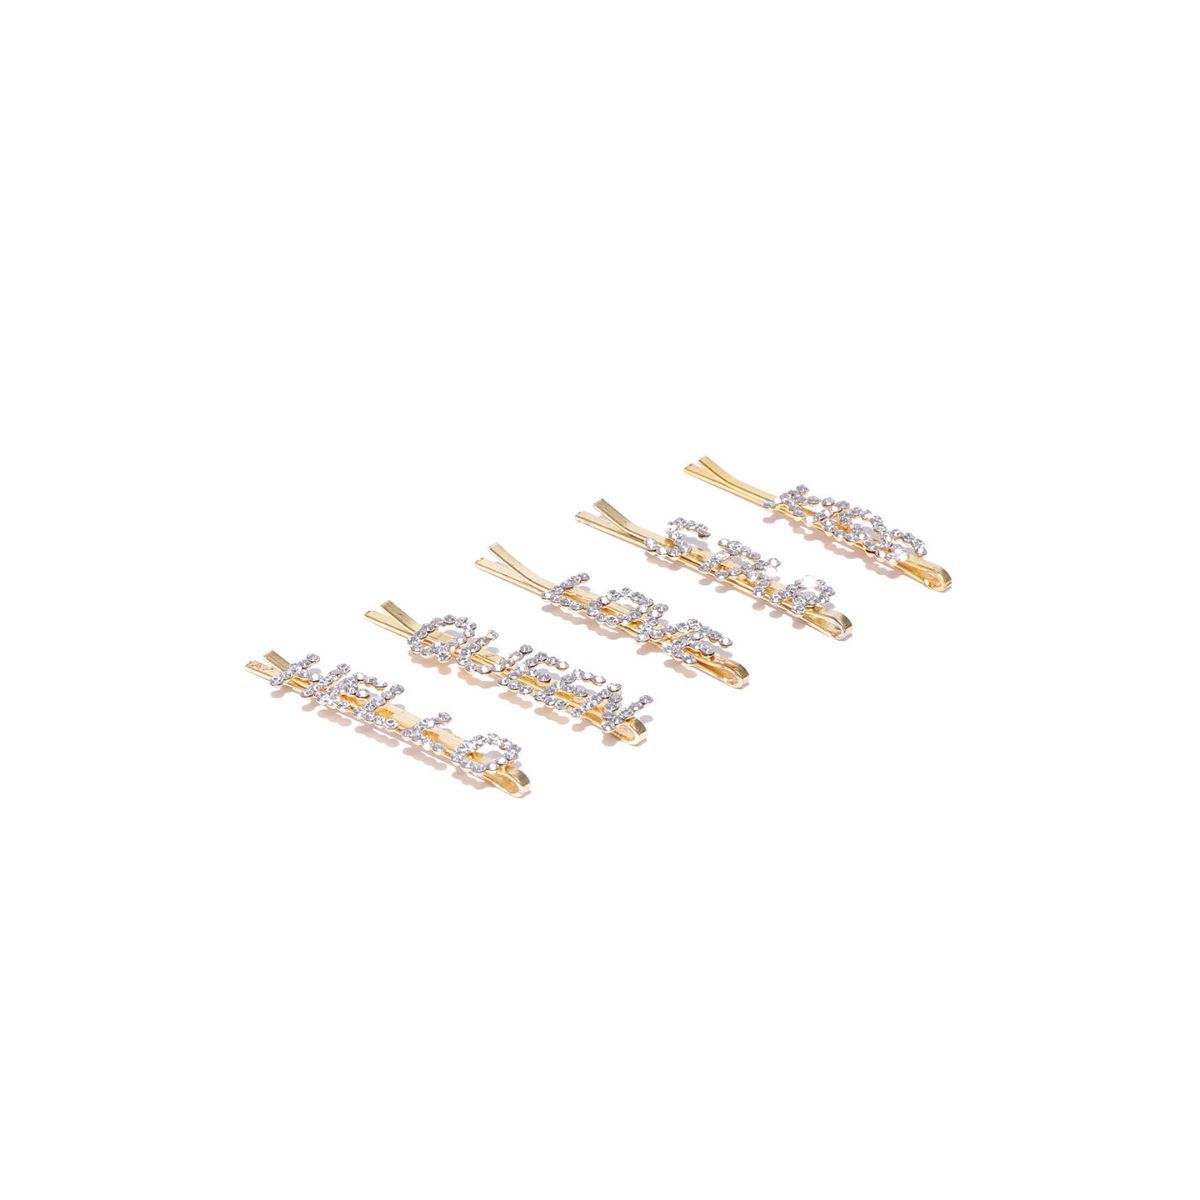 Blueberry Set Of 5 Gold Plated Bobby Pins (Pack of 5)